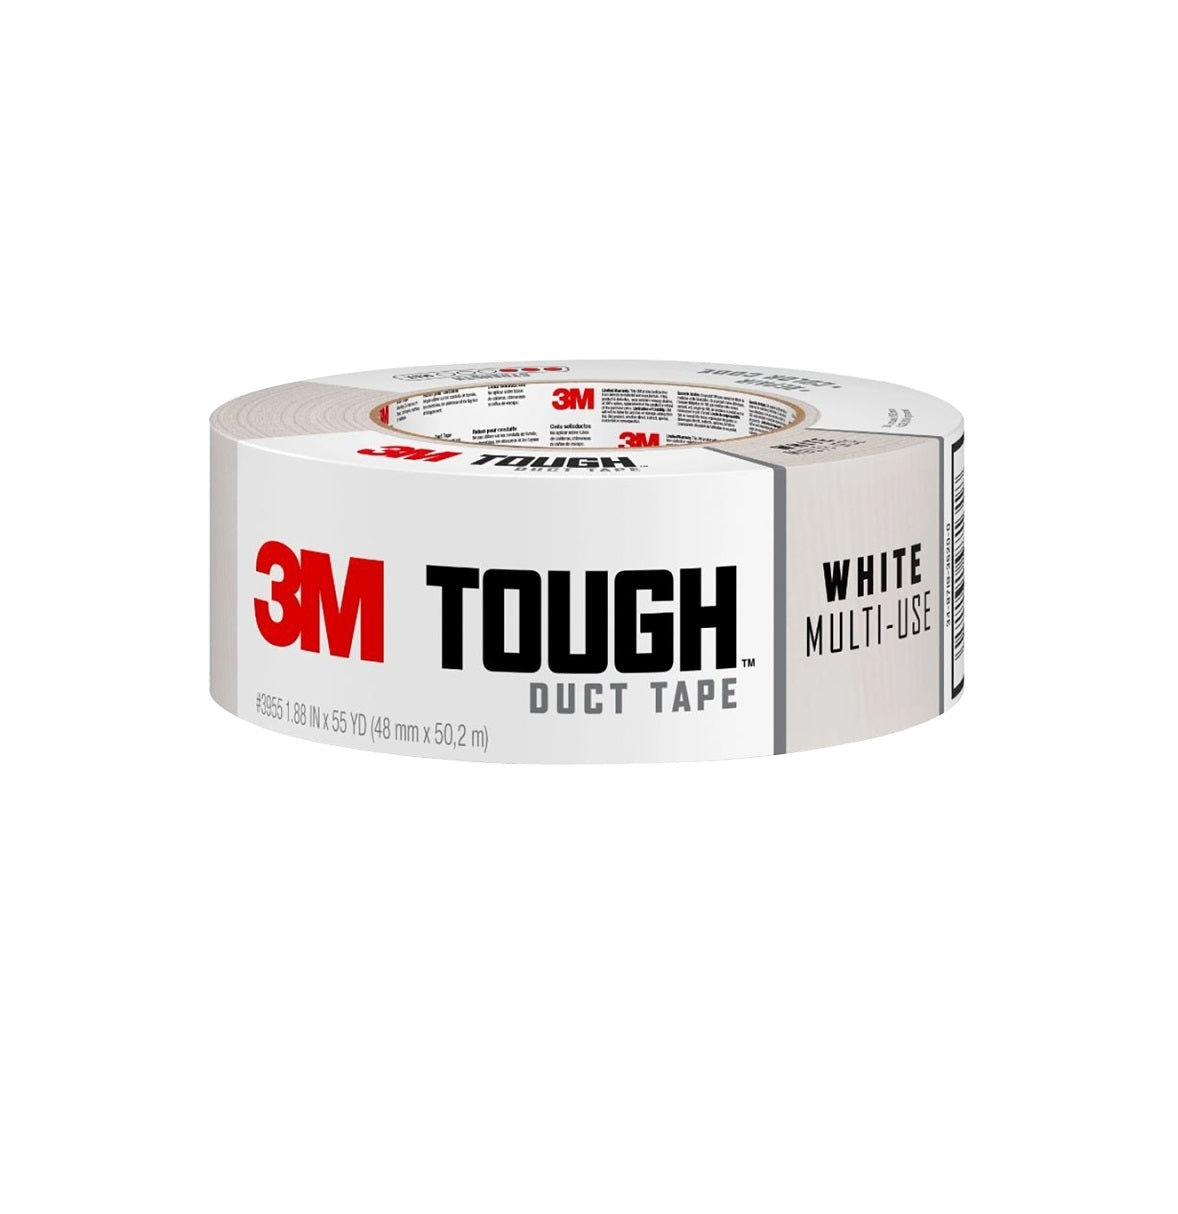 3M 3955-WH Tough Duct Tape, White, 1.88 Inch x 55 Yards